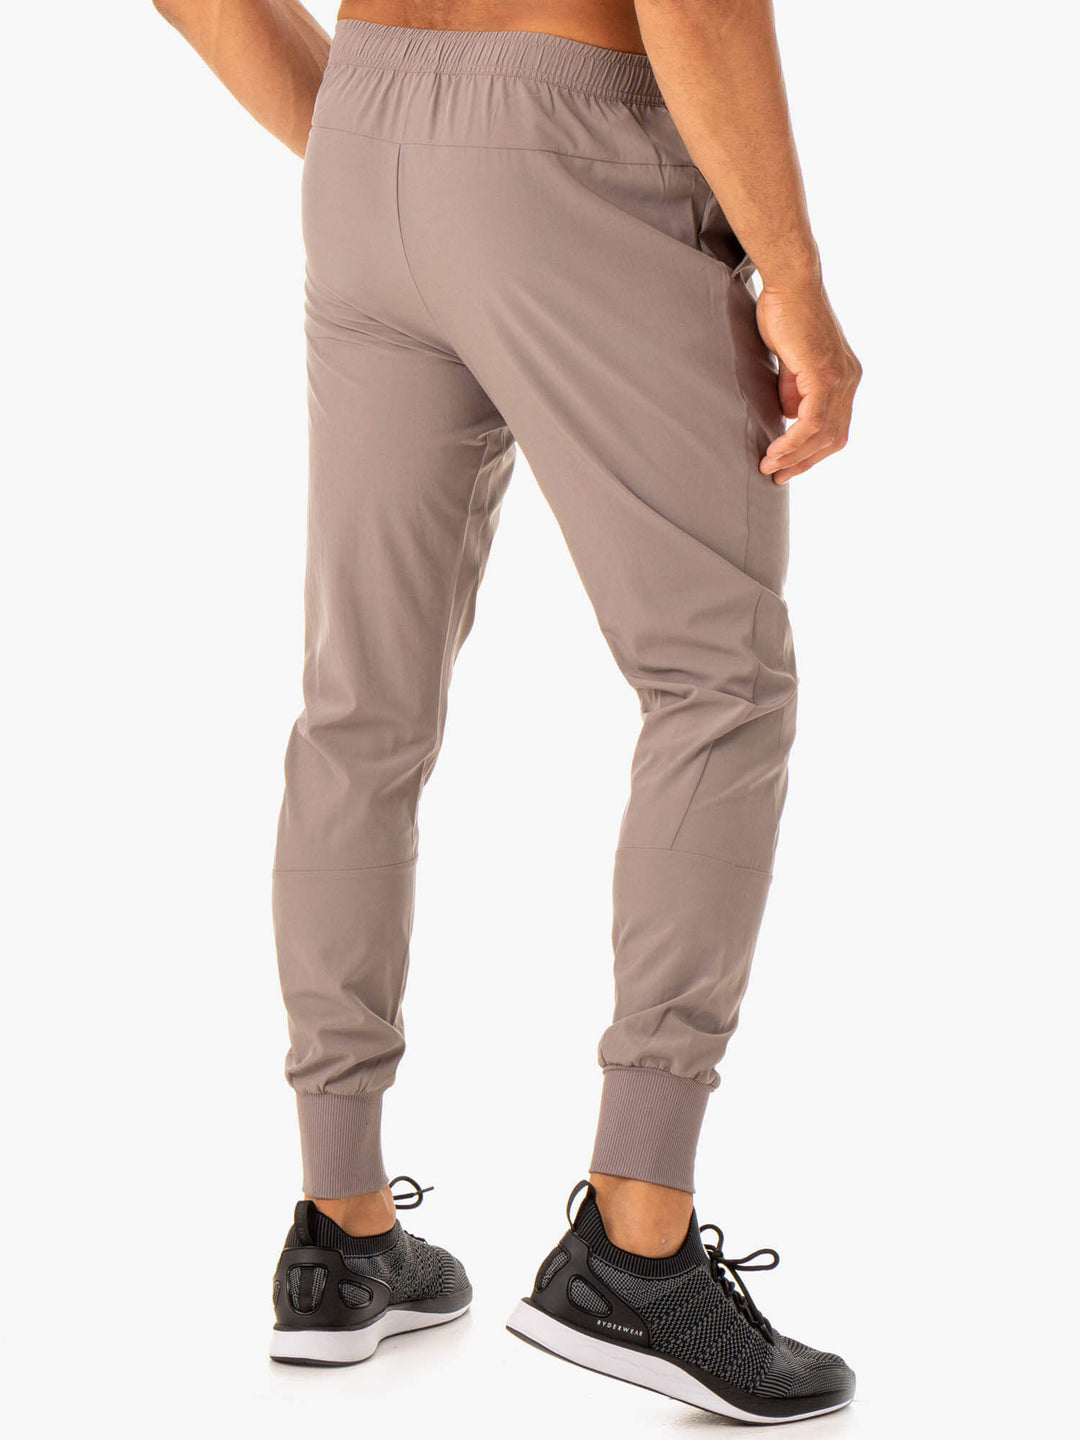 Division Woven Joggers - Taupe Clothing Ryderwear 